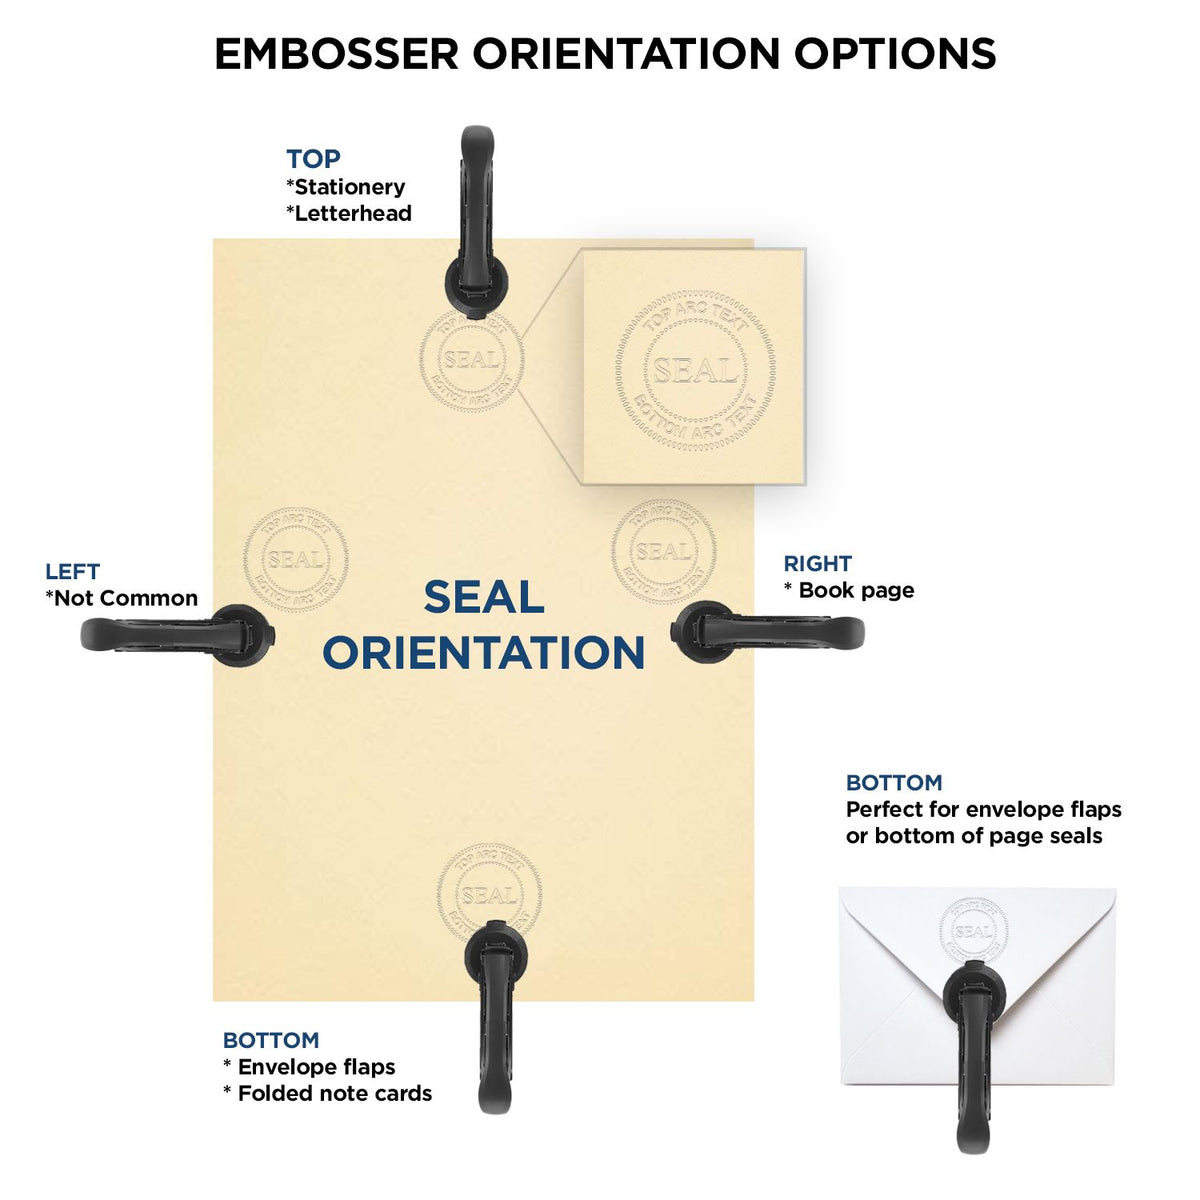 An infographic for the State of Michigan Extended Long Reach Engineer Seal showing embosser orientation, this is showing examples of a top, bottom, right and left insert.